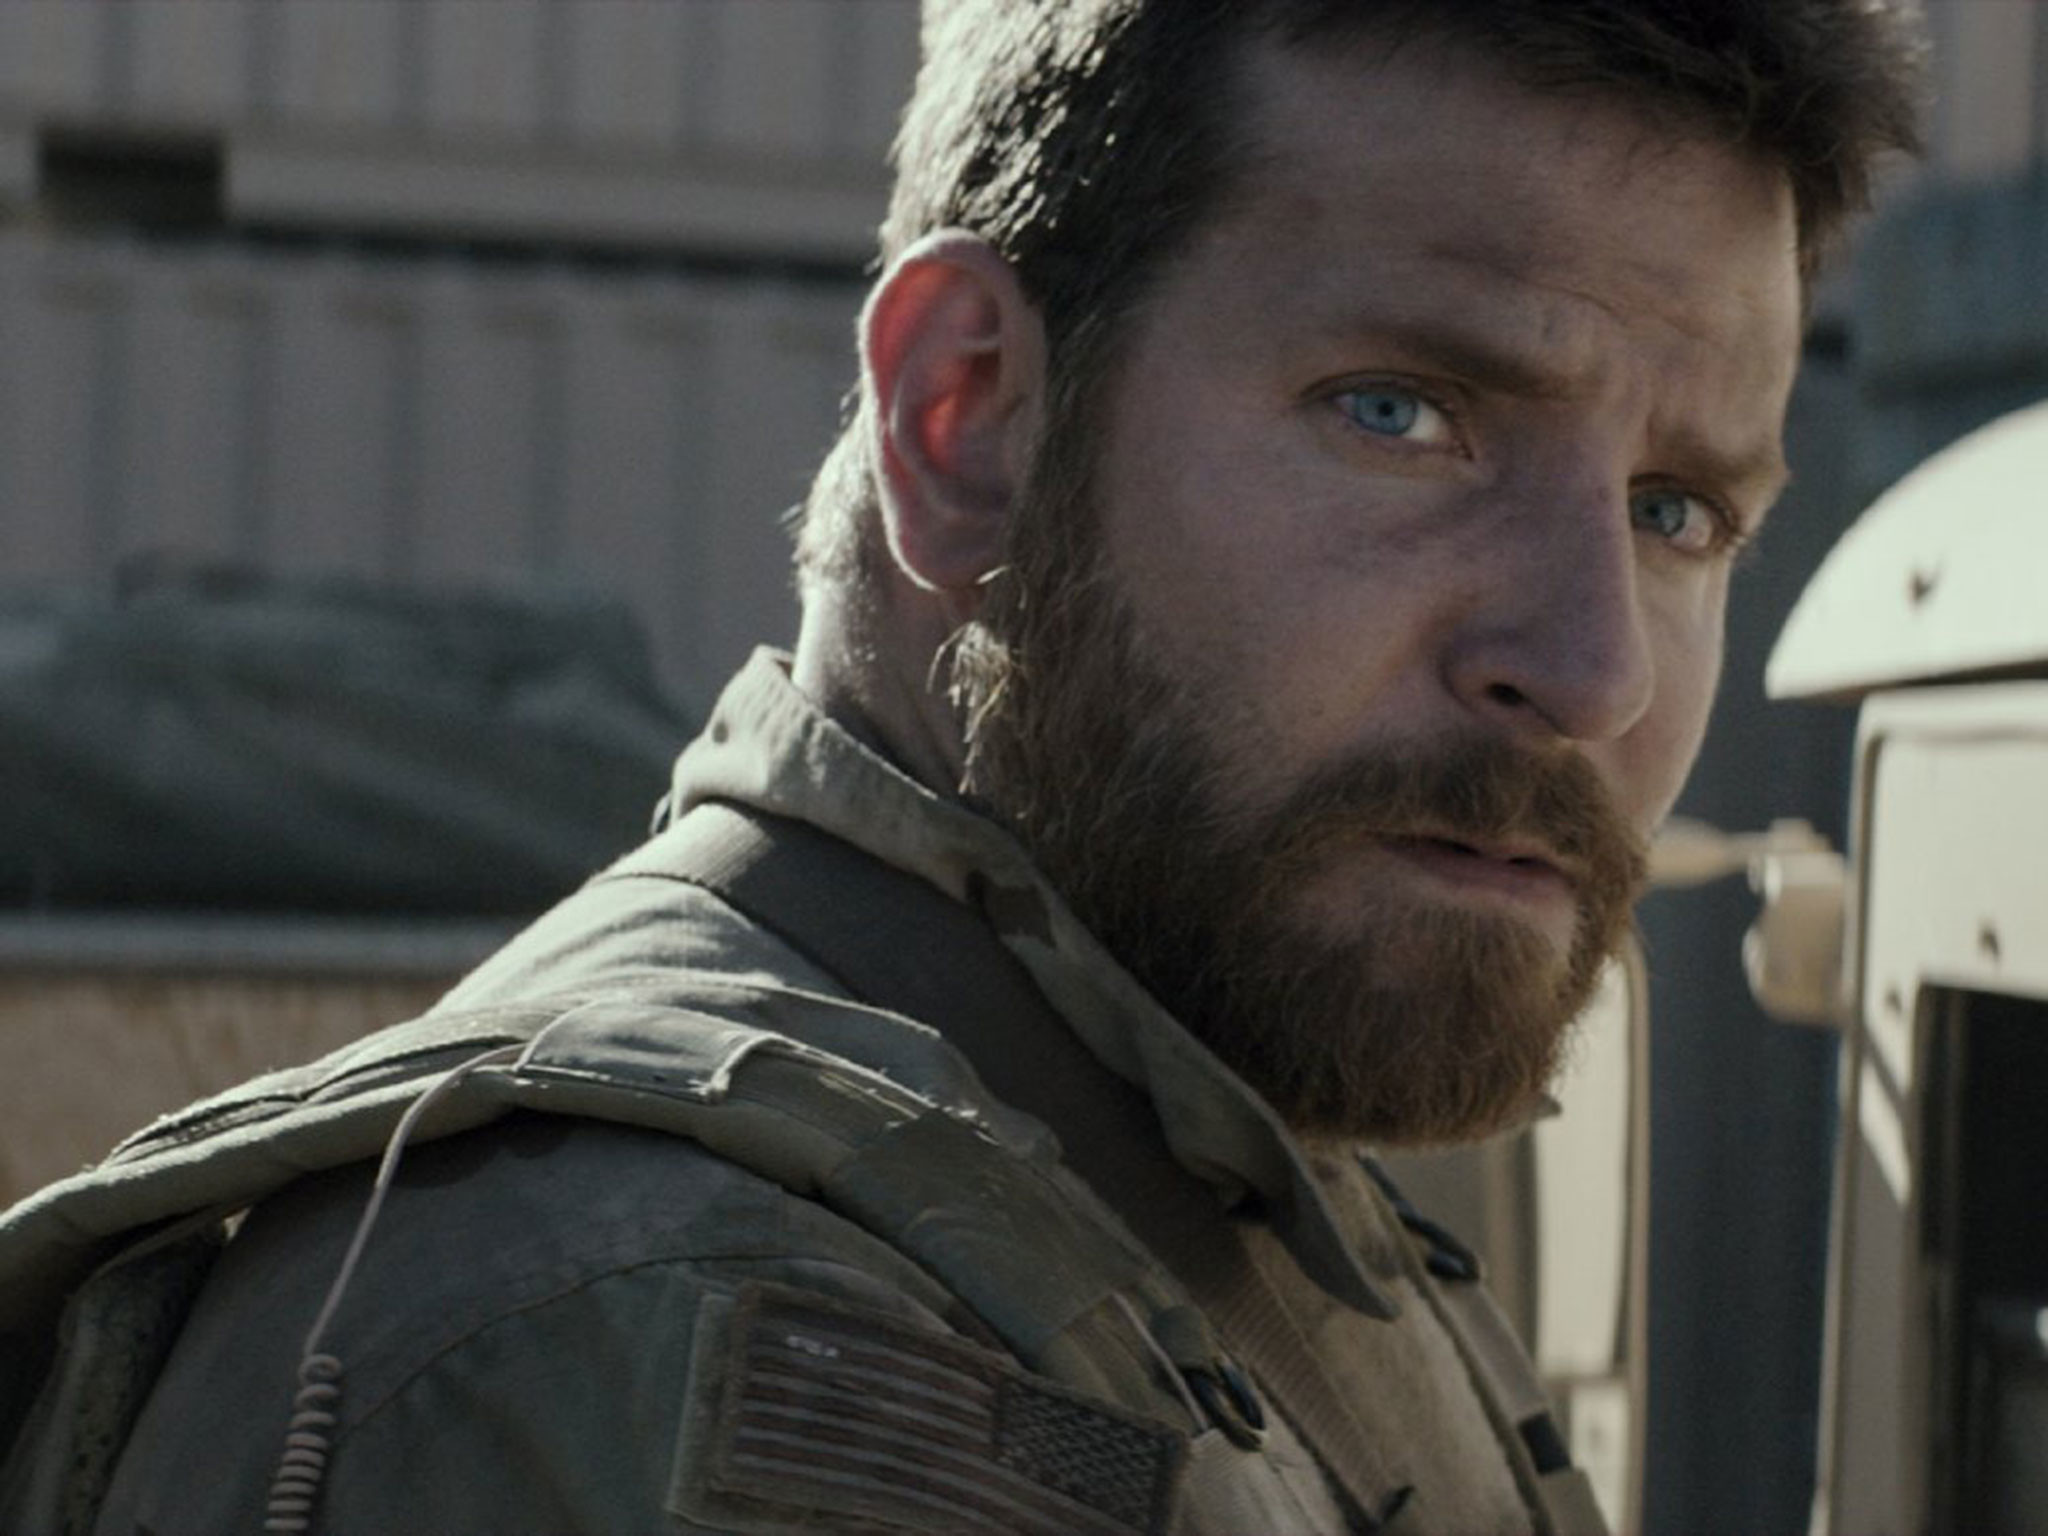 2048x1536 American Sniper trailer: Bradley Cooper weighs up life of Iraqi child in  tense new clip | The Independent